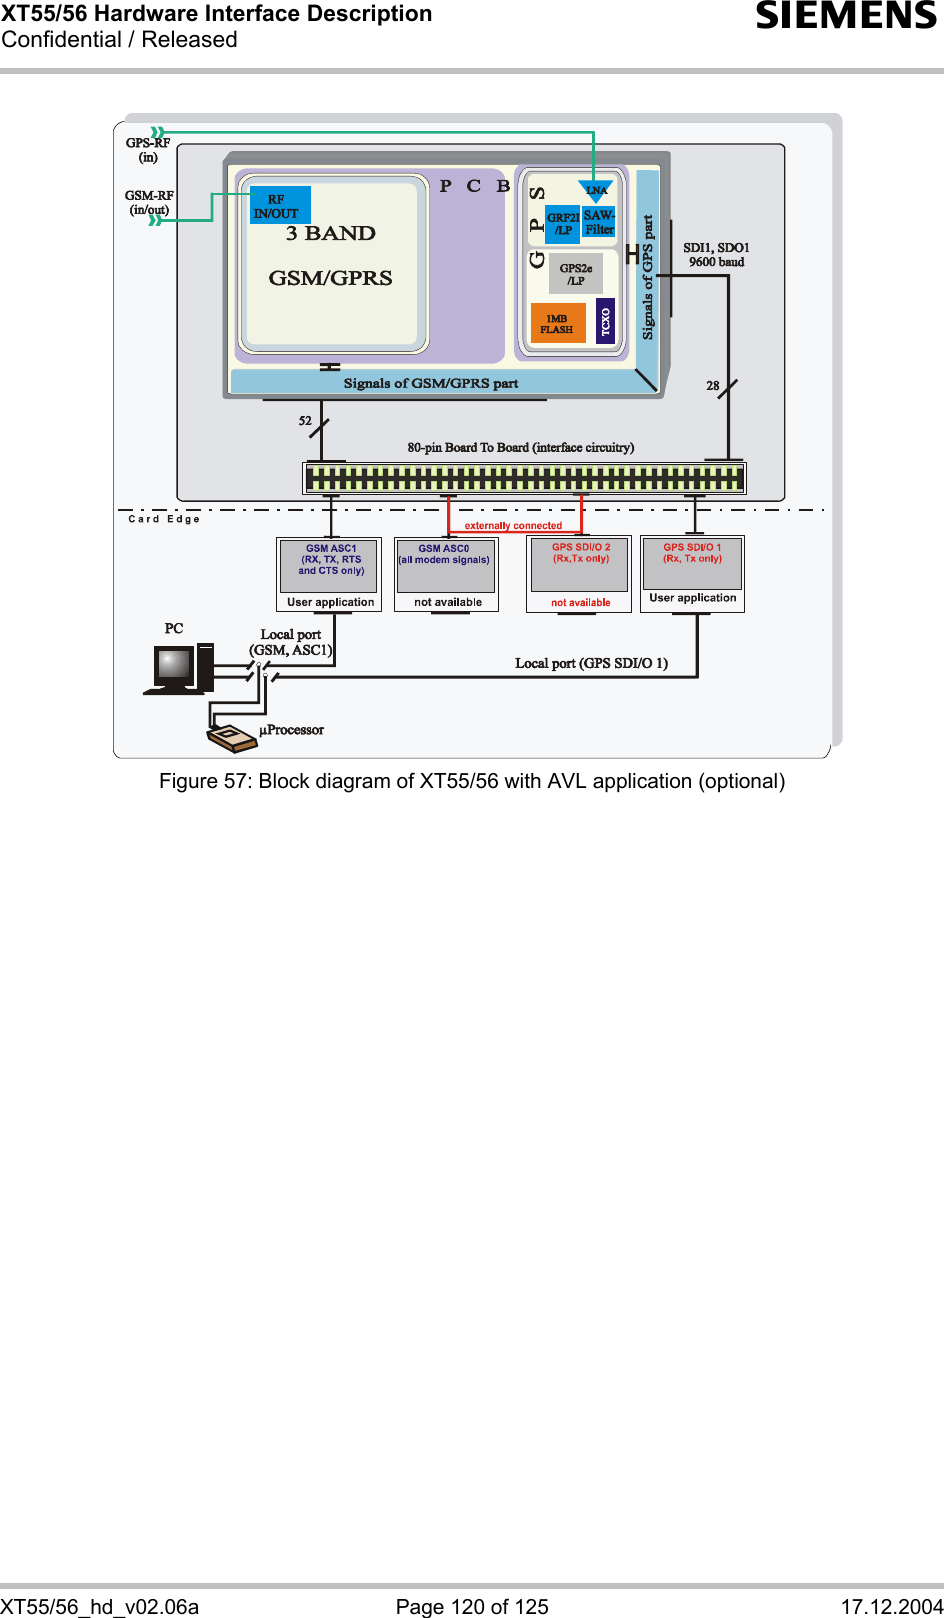 XT55/56 Hardware Interface Description Confidential / Released s XT55/56_hd_v02.06a  Page 120 of 125  17.12.2004                          Figure 57: Block diagram of XT55/56 with AVL application (optional) 